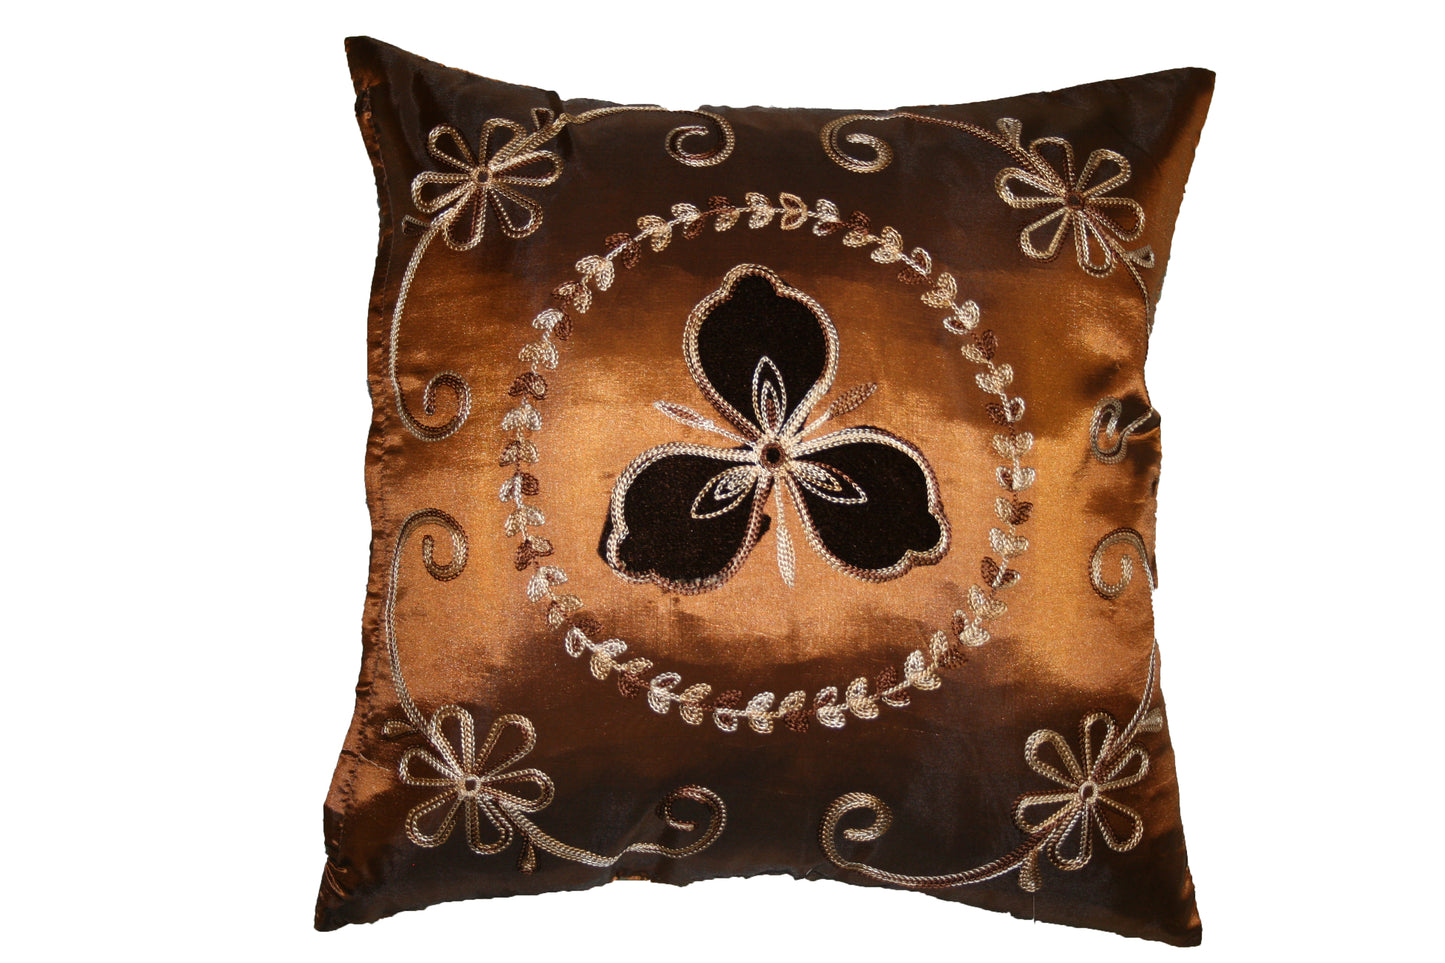 Silky Ornate Embroidered Velvet Floral design Decorative Throw Pillow Covers